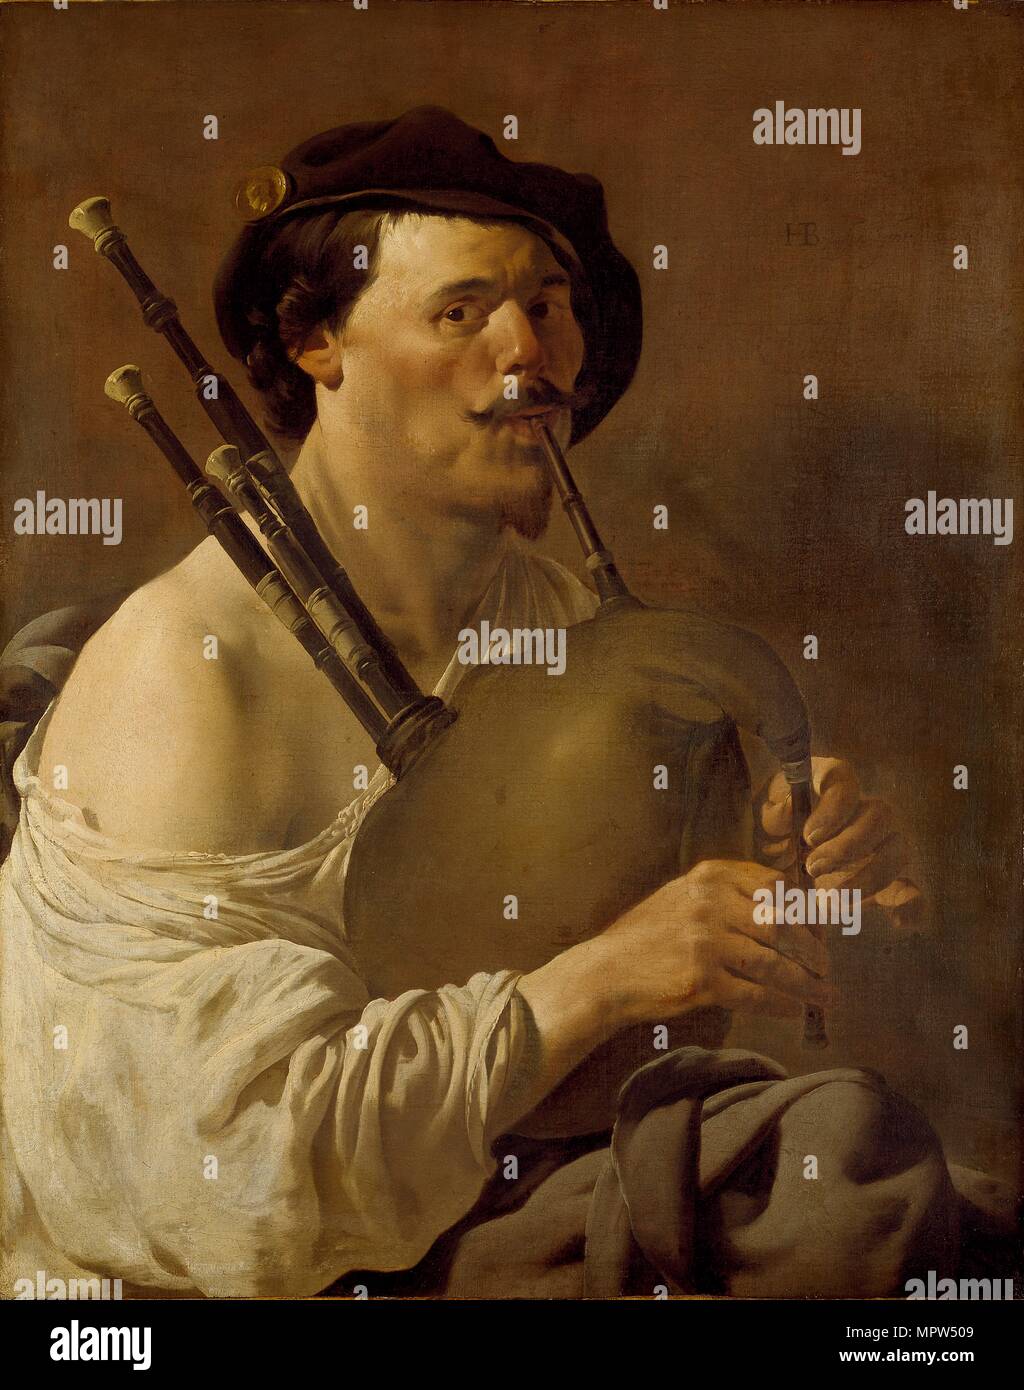 Portrait of a Man playing the Bagpipes, 1624. Artist: Hendrick ter Brugghen. Stock Photo